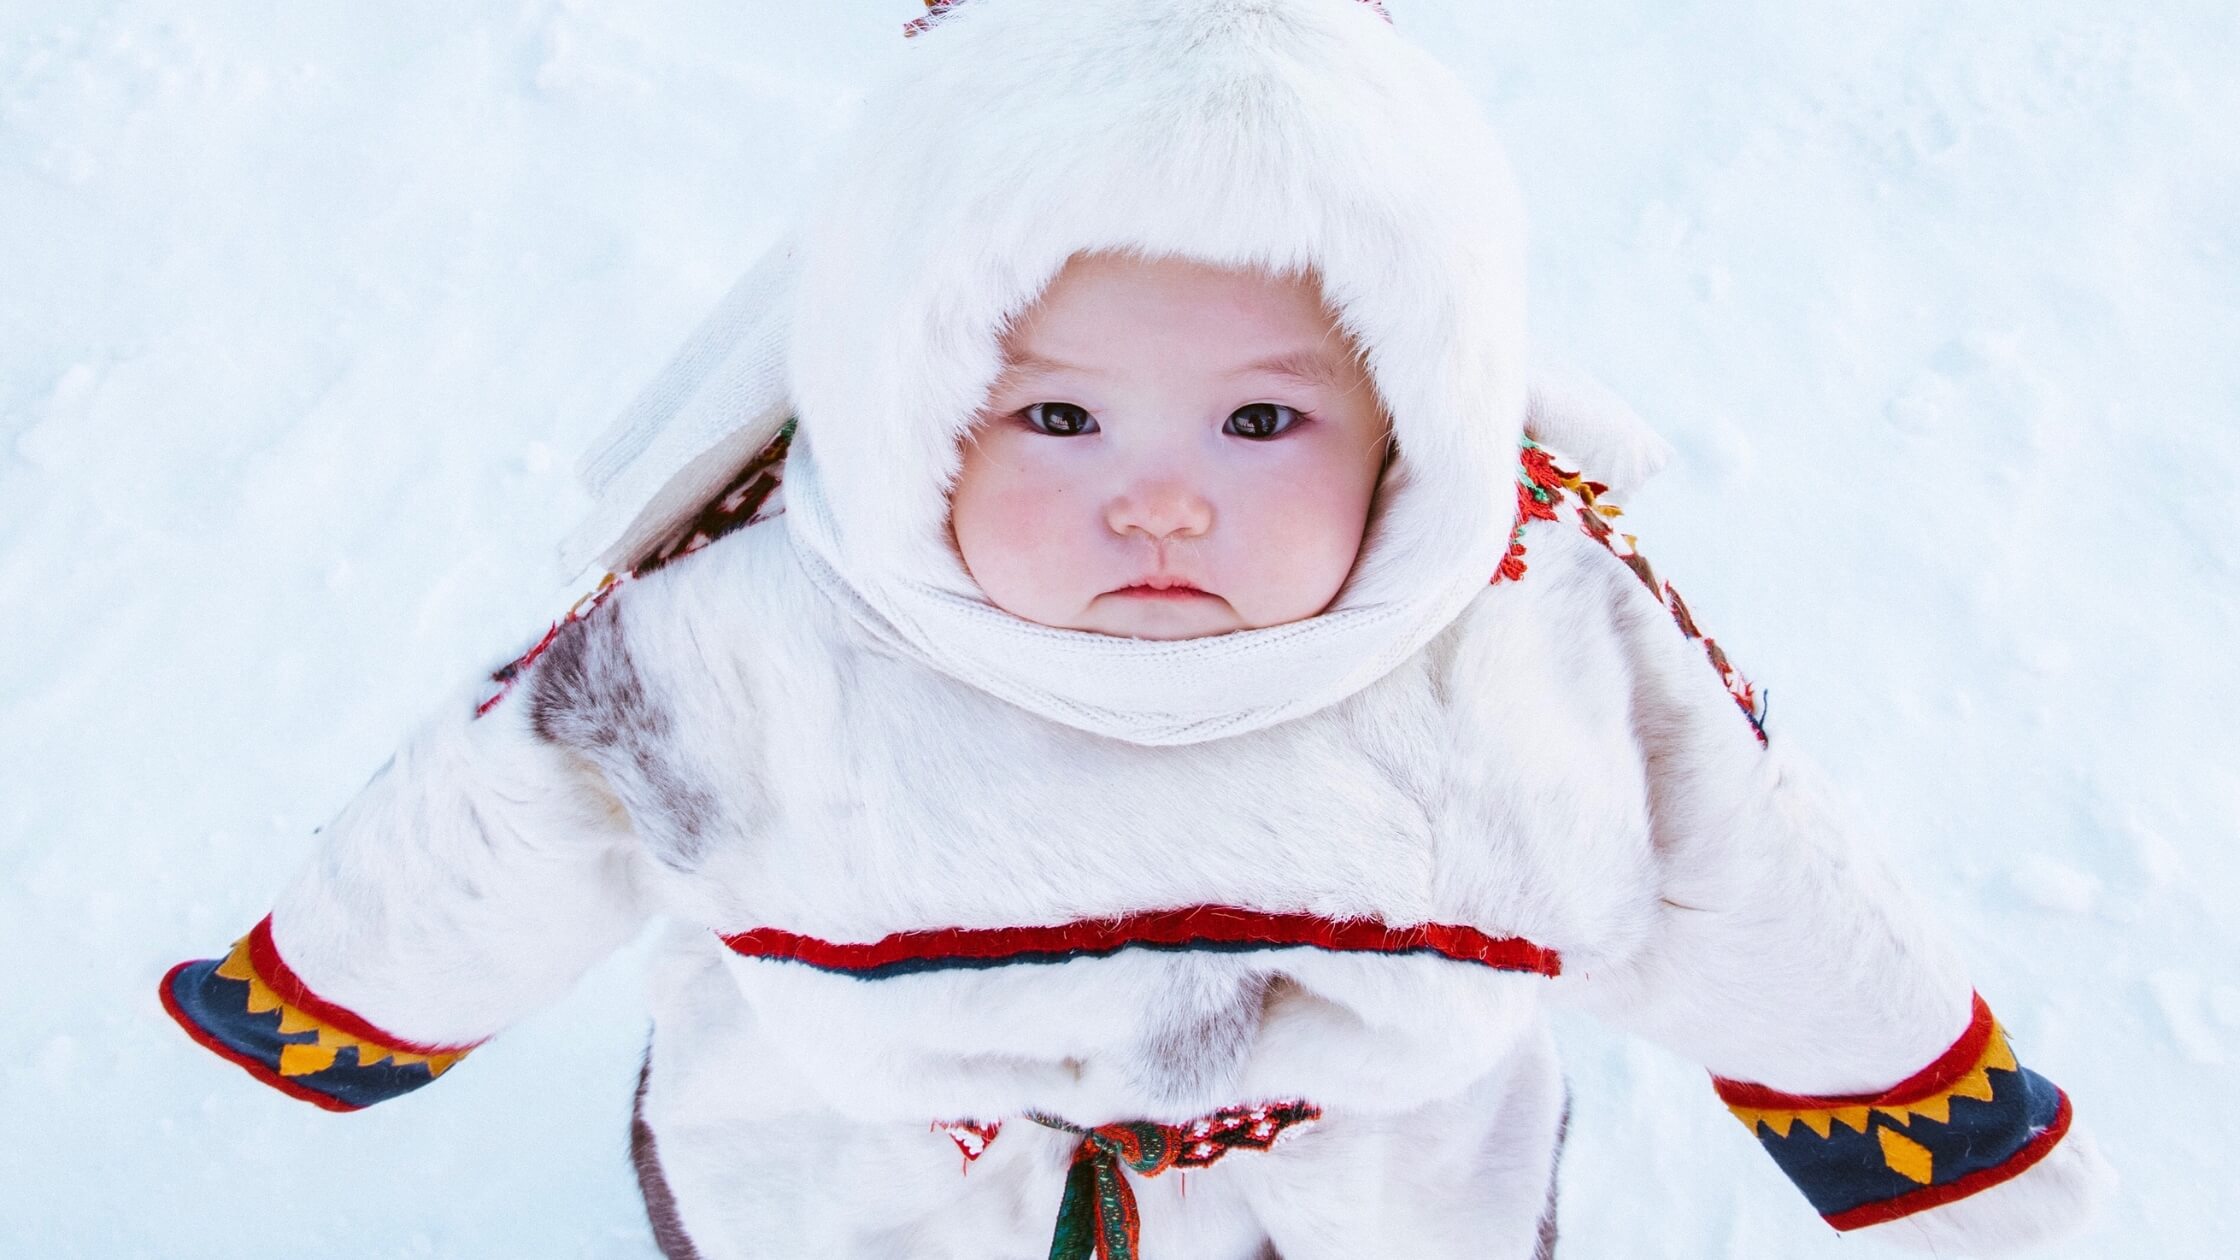 Baby bundled up in the snow